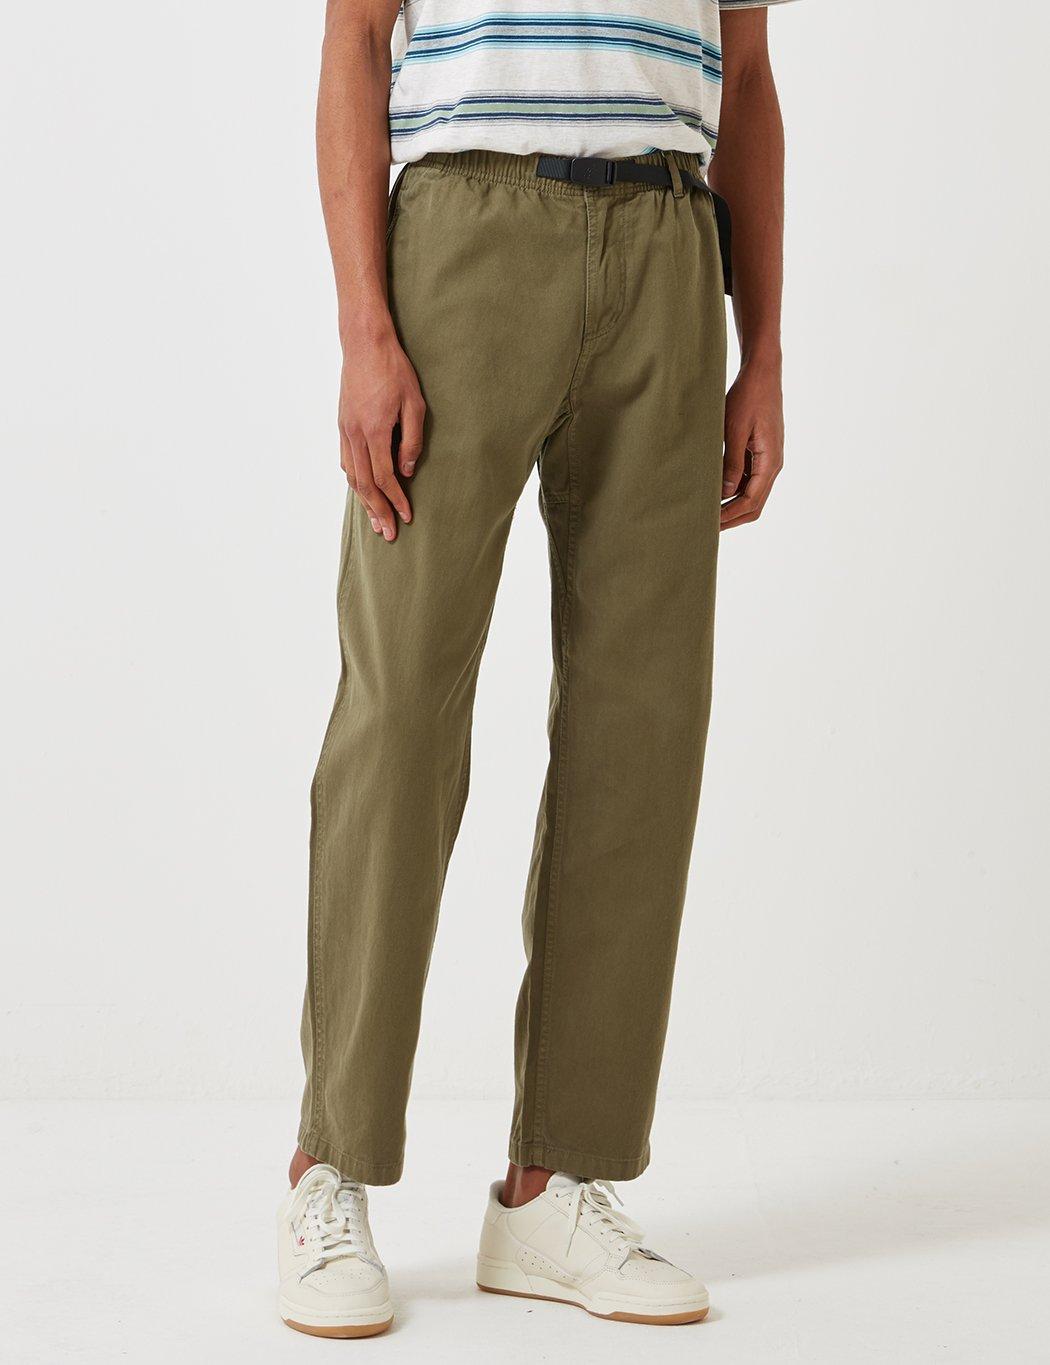 Gramicci Original Fit G Pant (relaxed) in Green for Men - Lyst